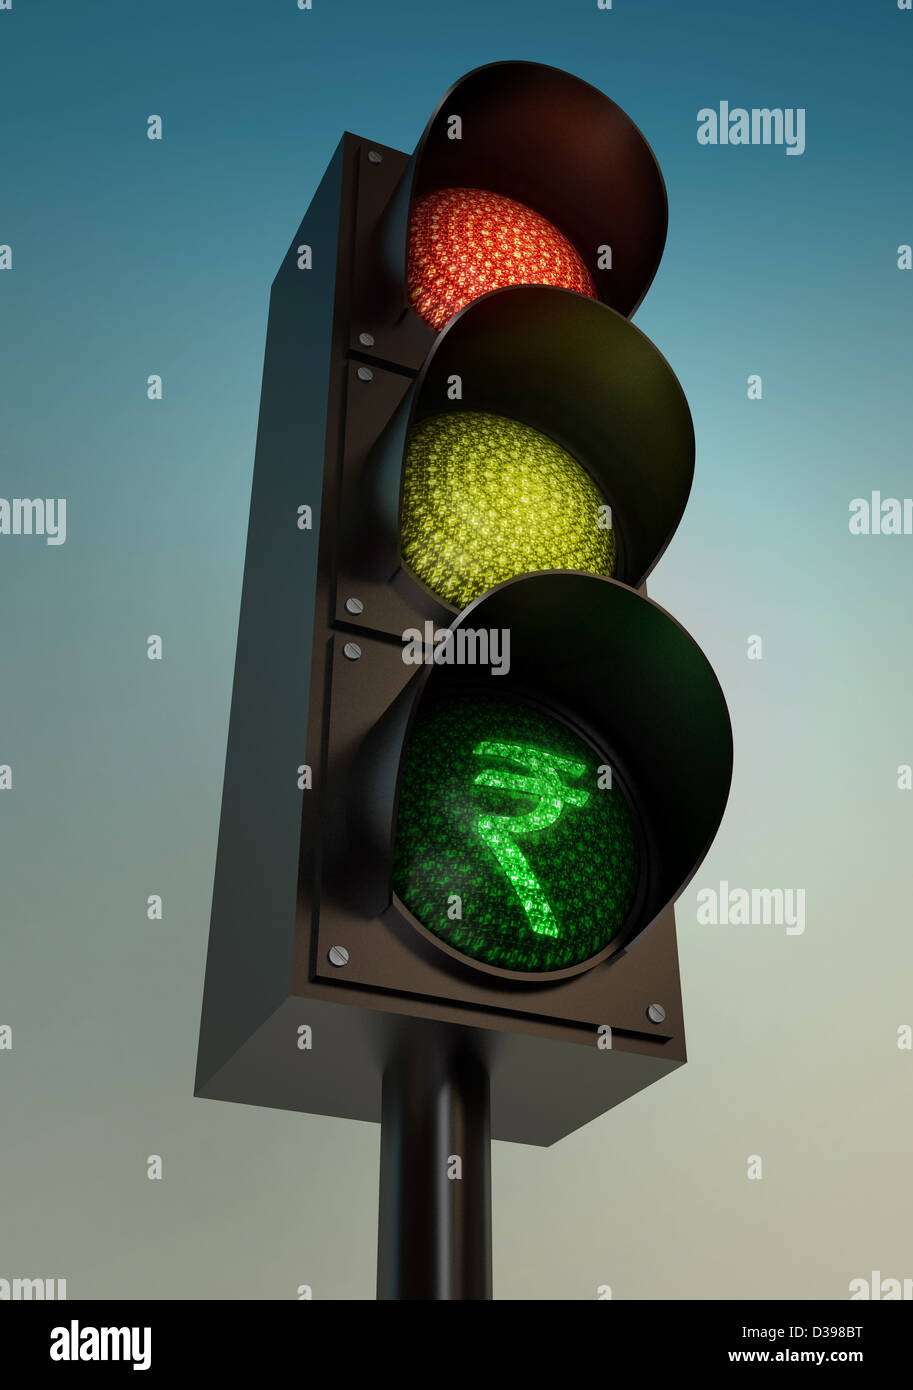 Low angle view of Indian Rupee on traffic light against clear sky Stock Photo